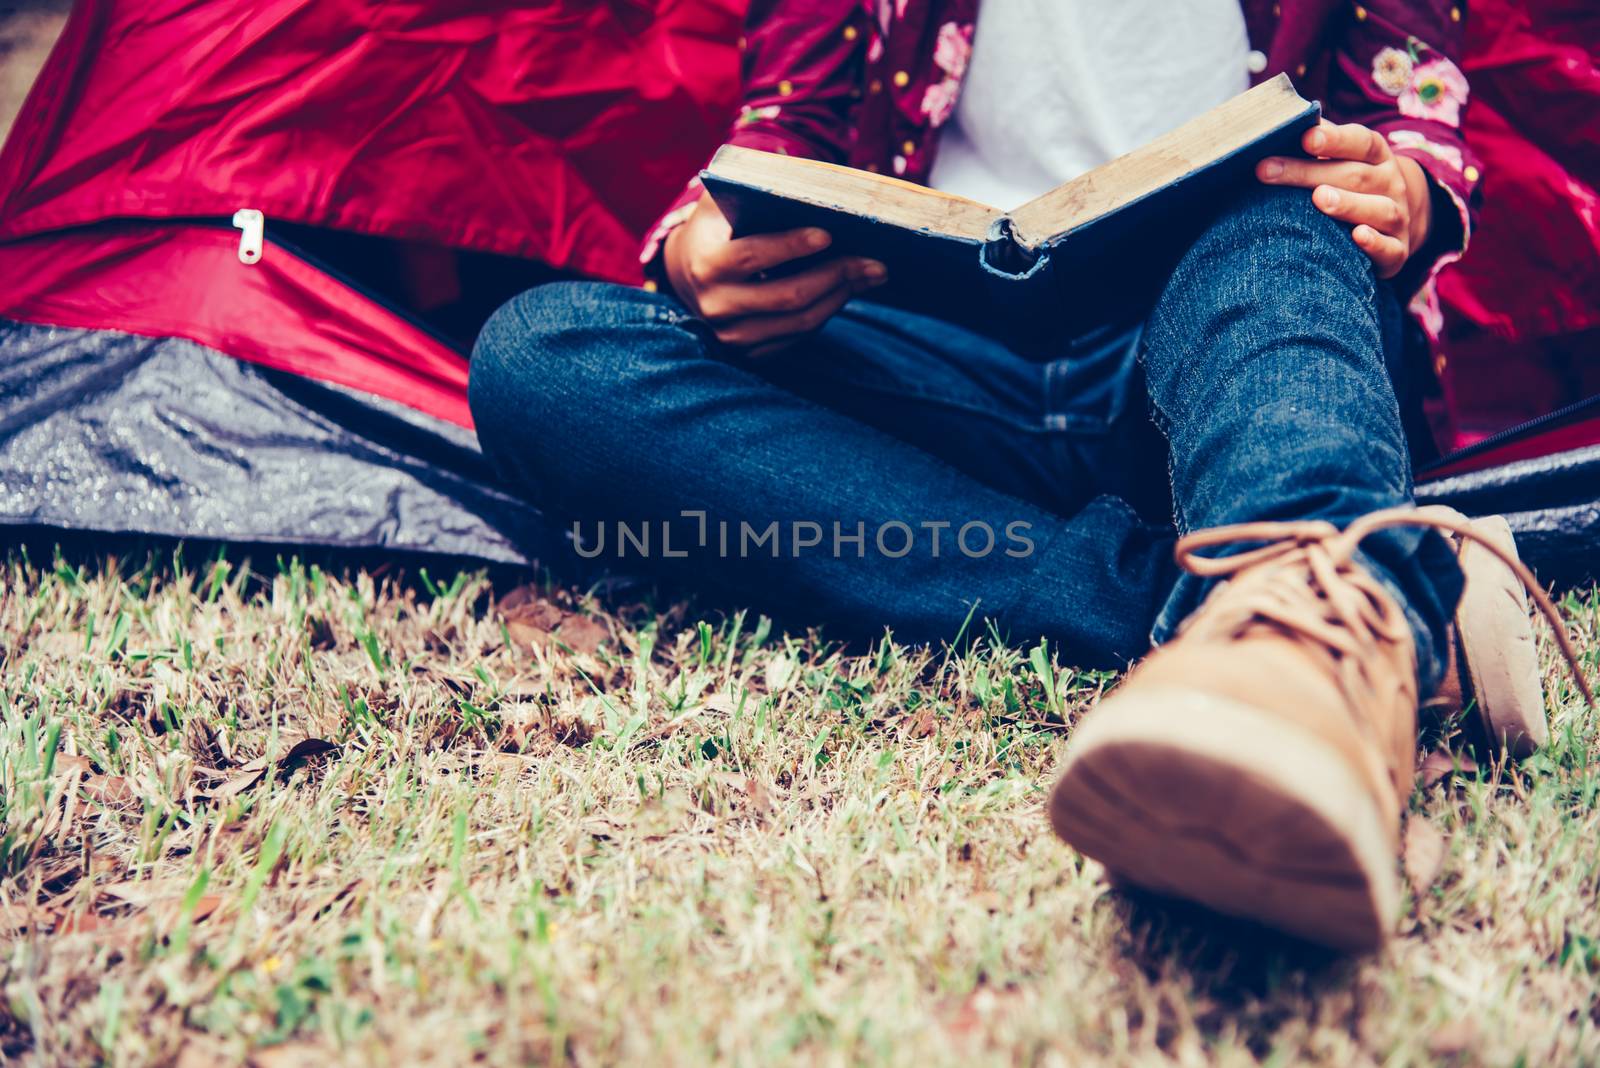 Teenagers are relaxing by reading books in tent picnic area in t by photobyphotoboy